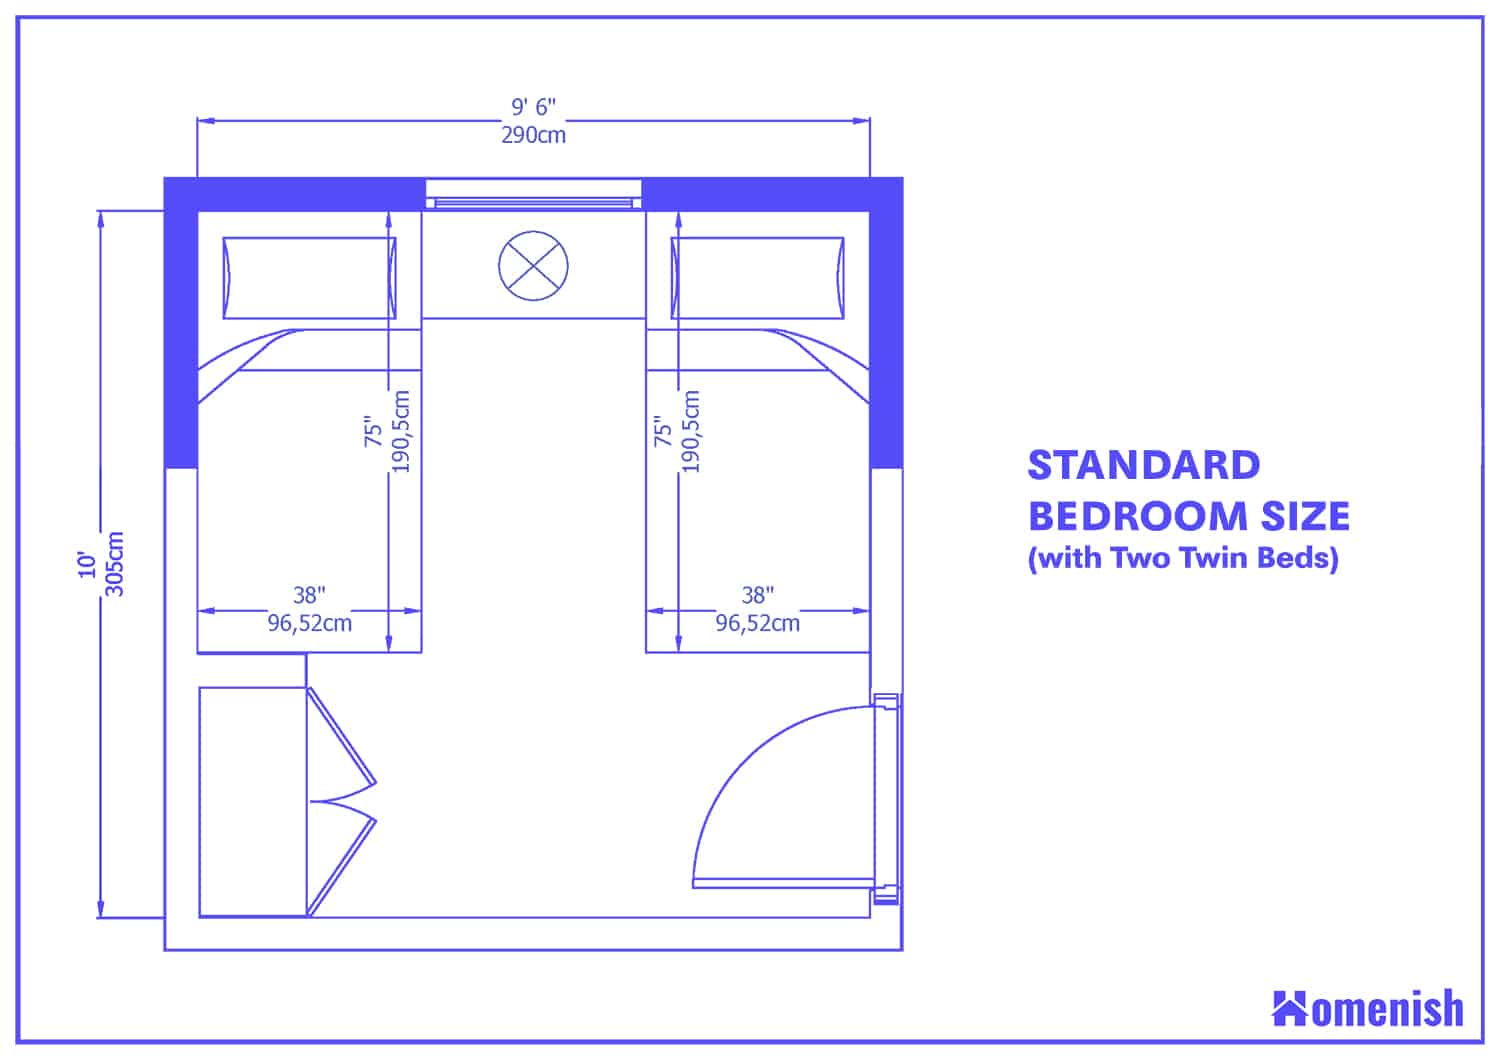 Average Bedroom Size And Layout Guide, How Long Is A Twin Bed In Feet